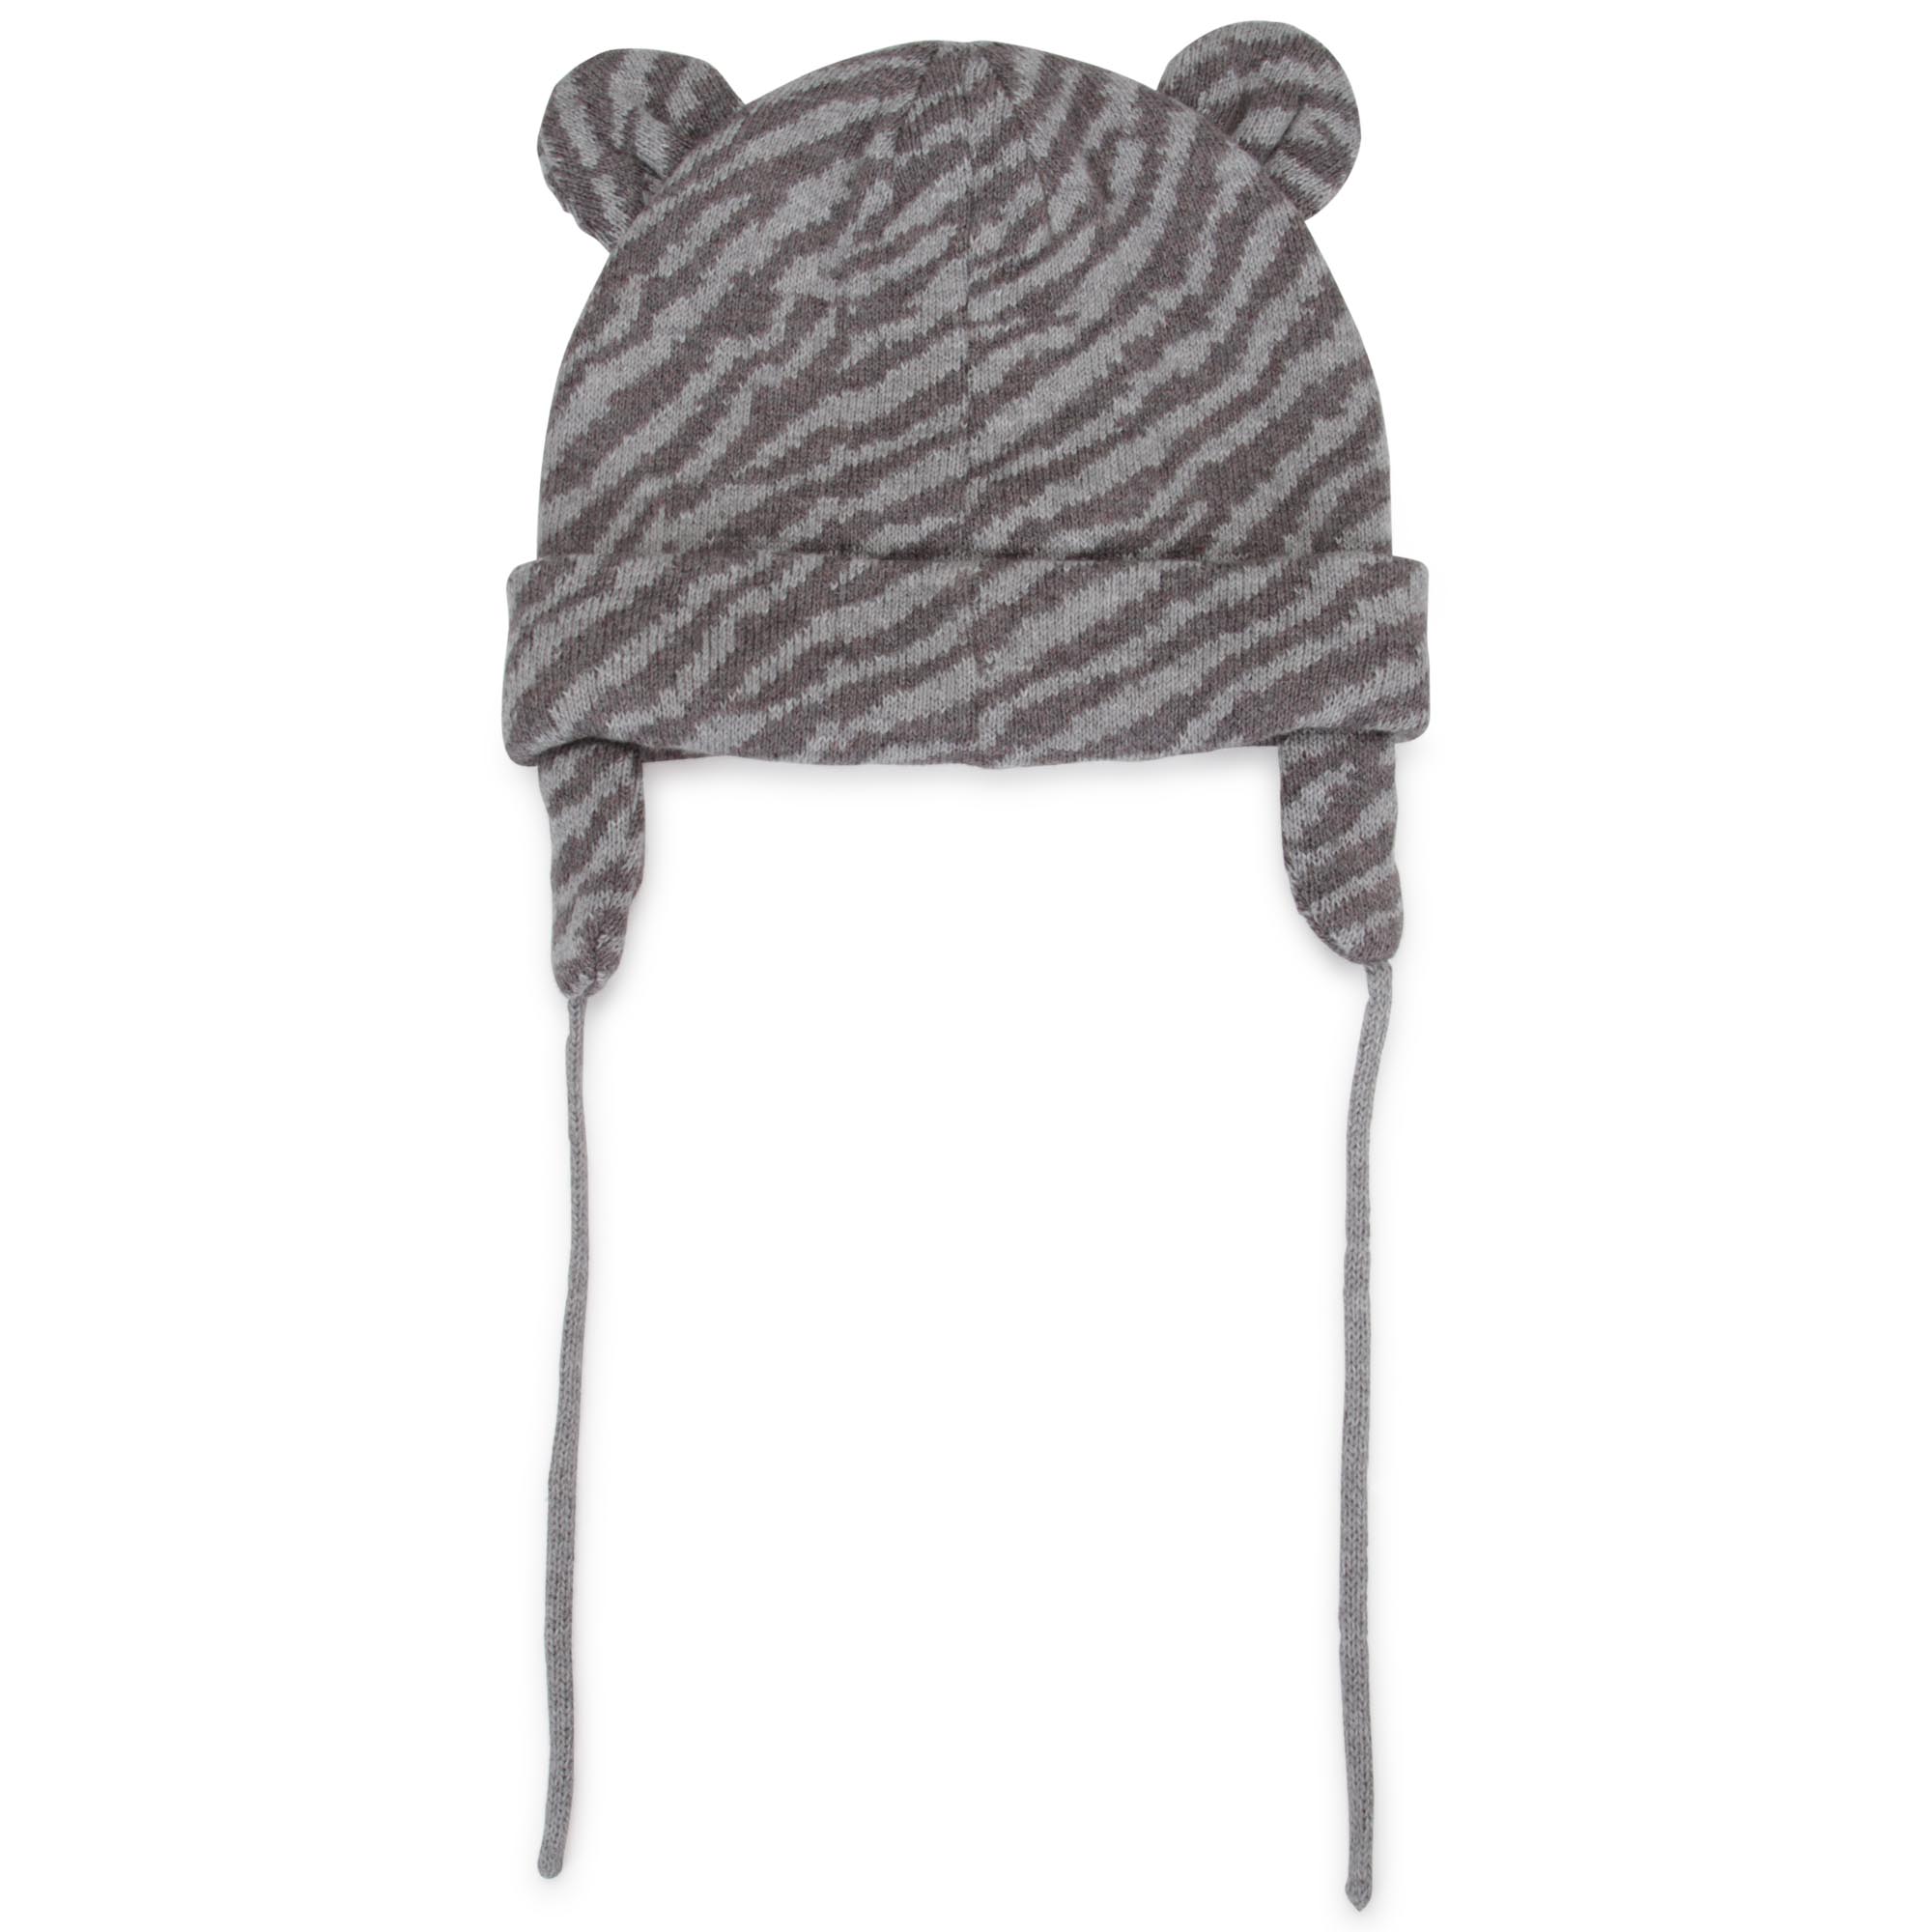 Cotton and cashmere hat KENZO KIDS for UNISEX